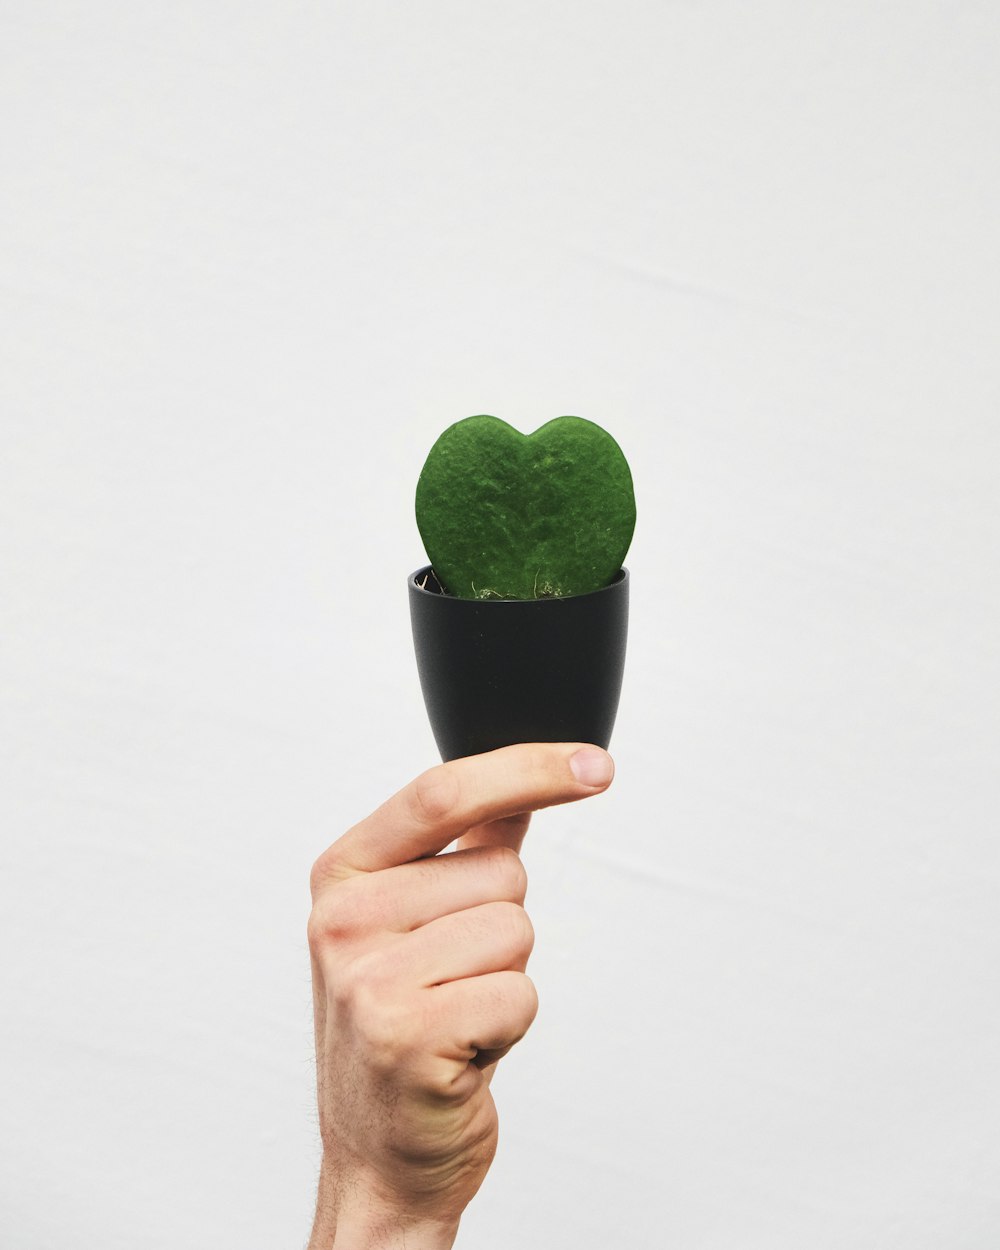 a hand holding a small green cactus in a black pot